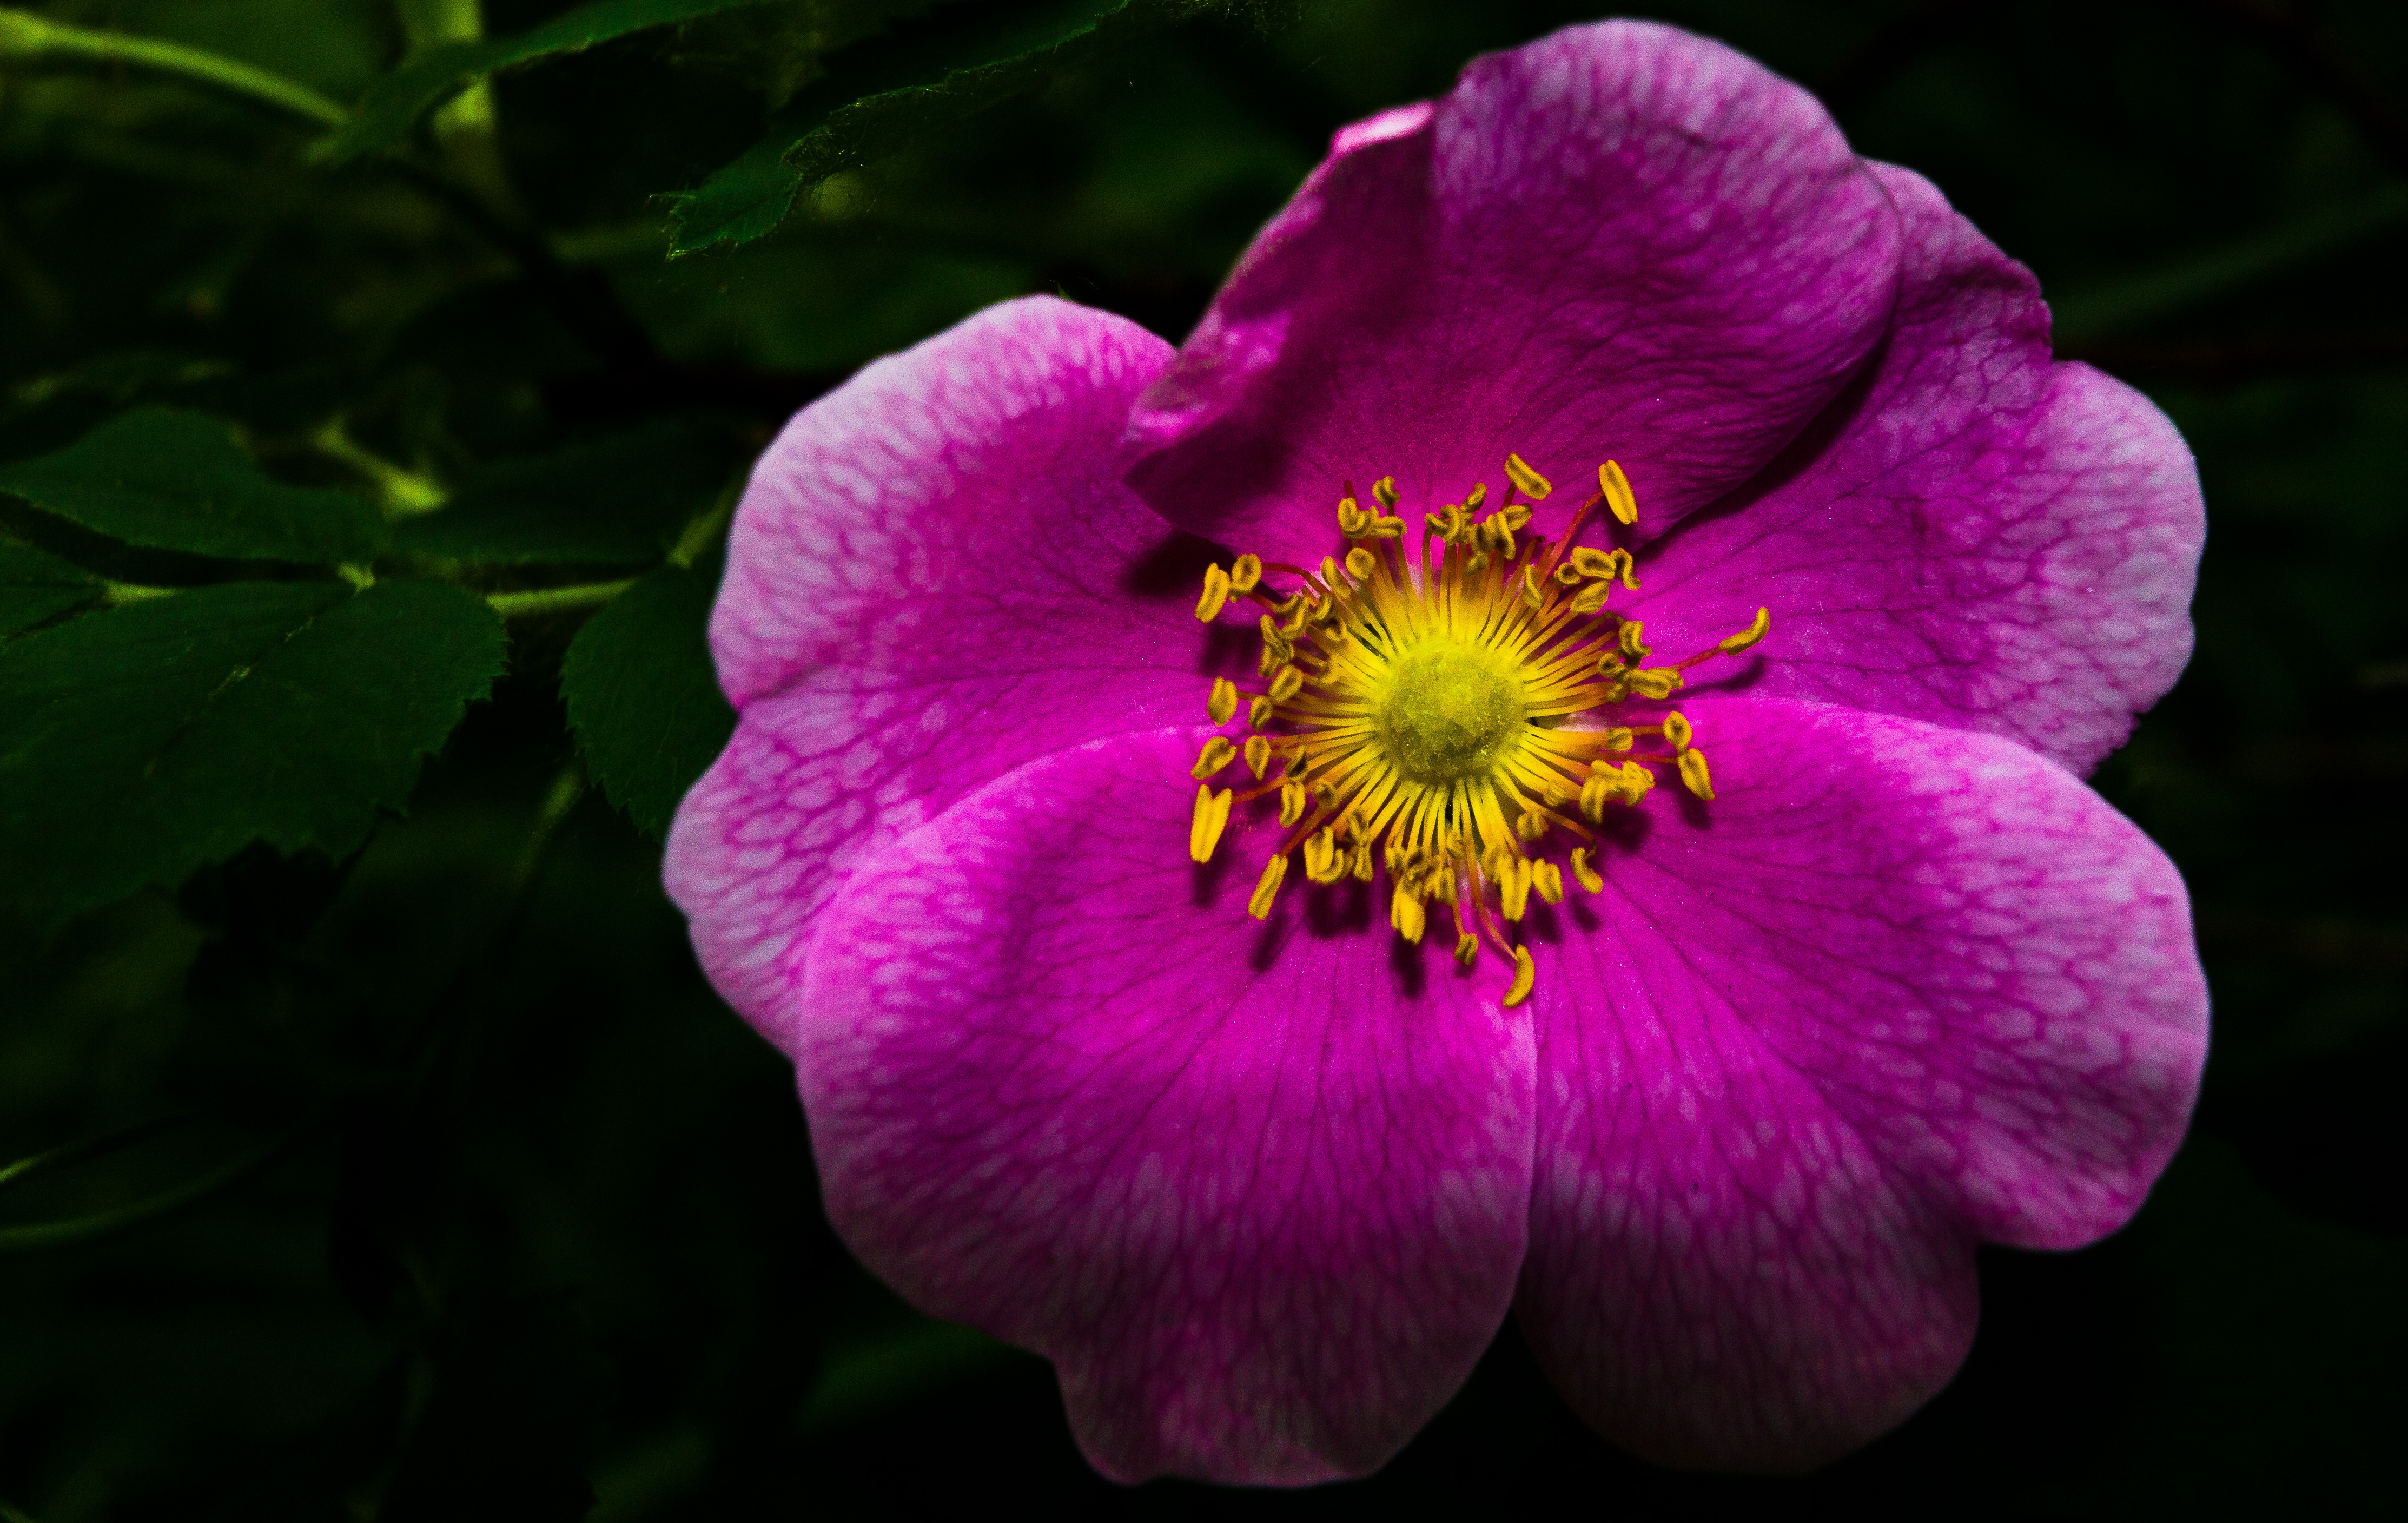 Official flower of Alberta, the prickly rose (Rosa arcicularis) is in danger of disappearing from other parts of its range, particularly in New England. | Photo by Kelly Marcum on Flickr